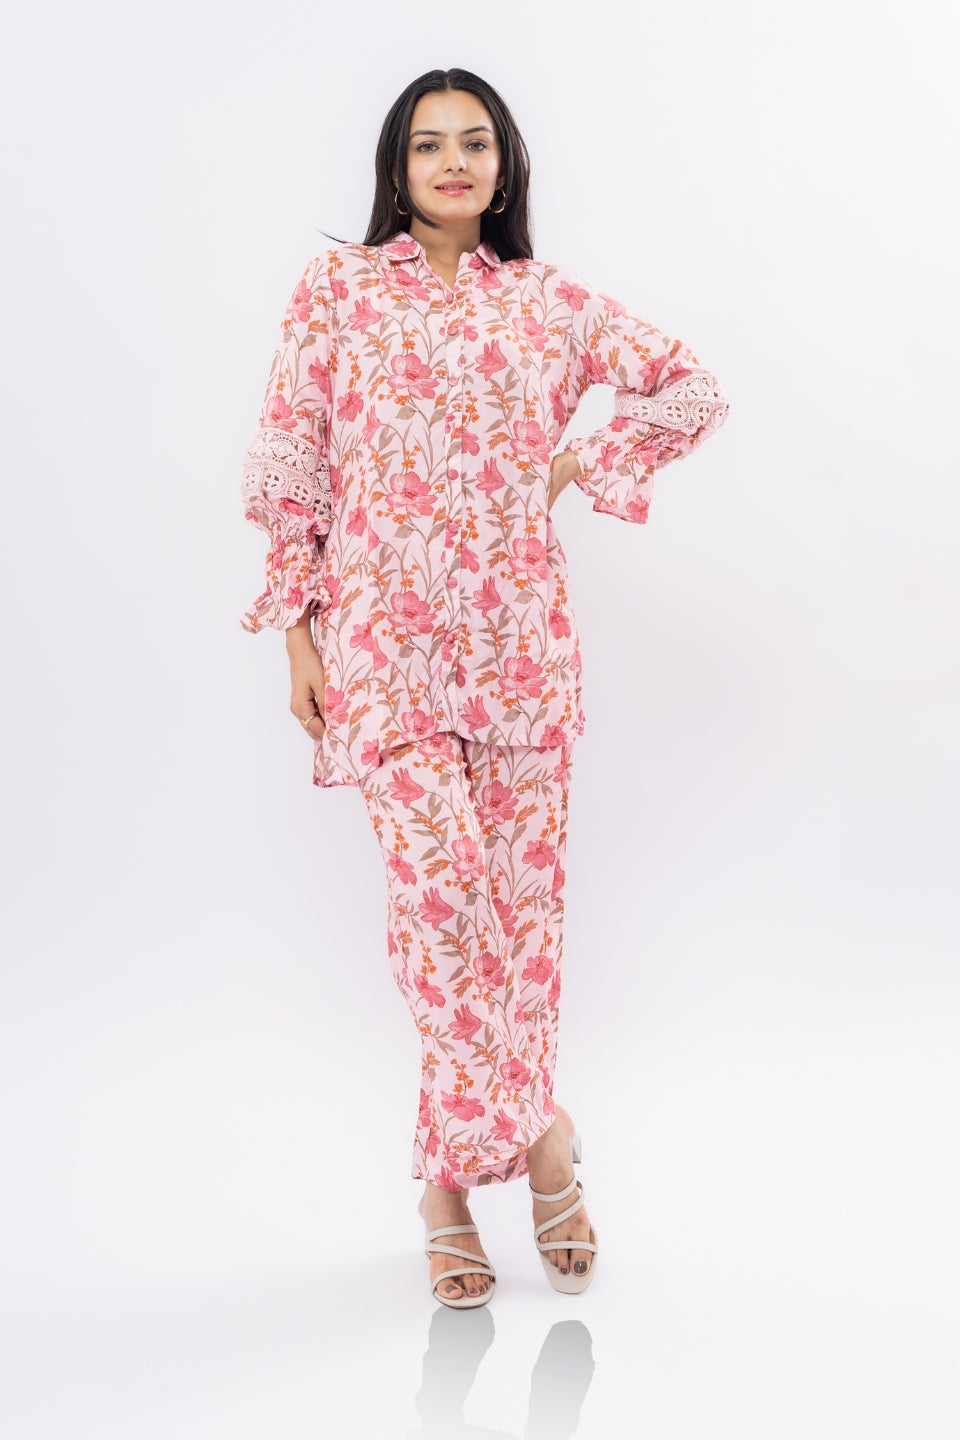 Ekisha's women muslin printed pink floral co-ord set, another front view